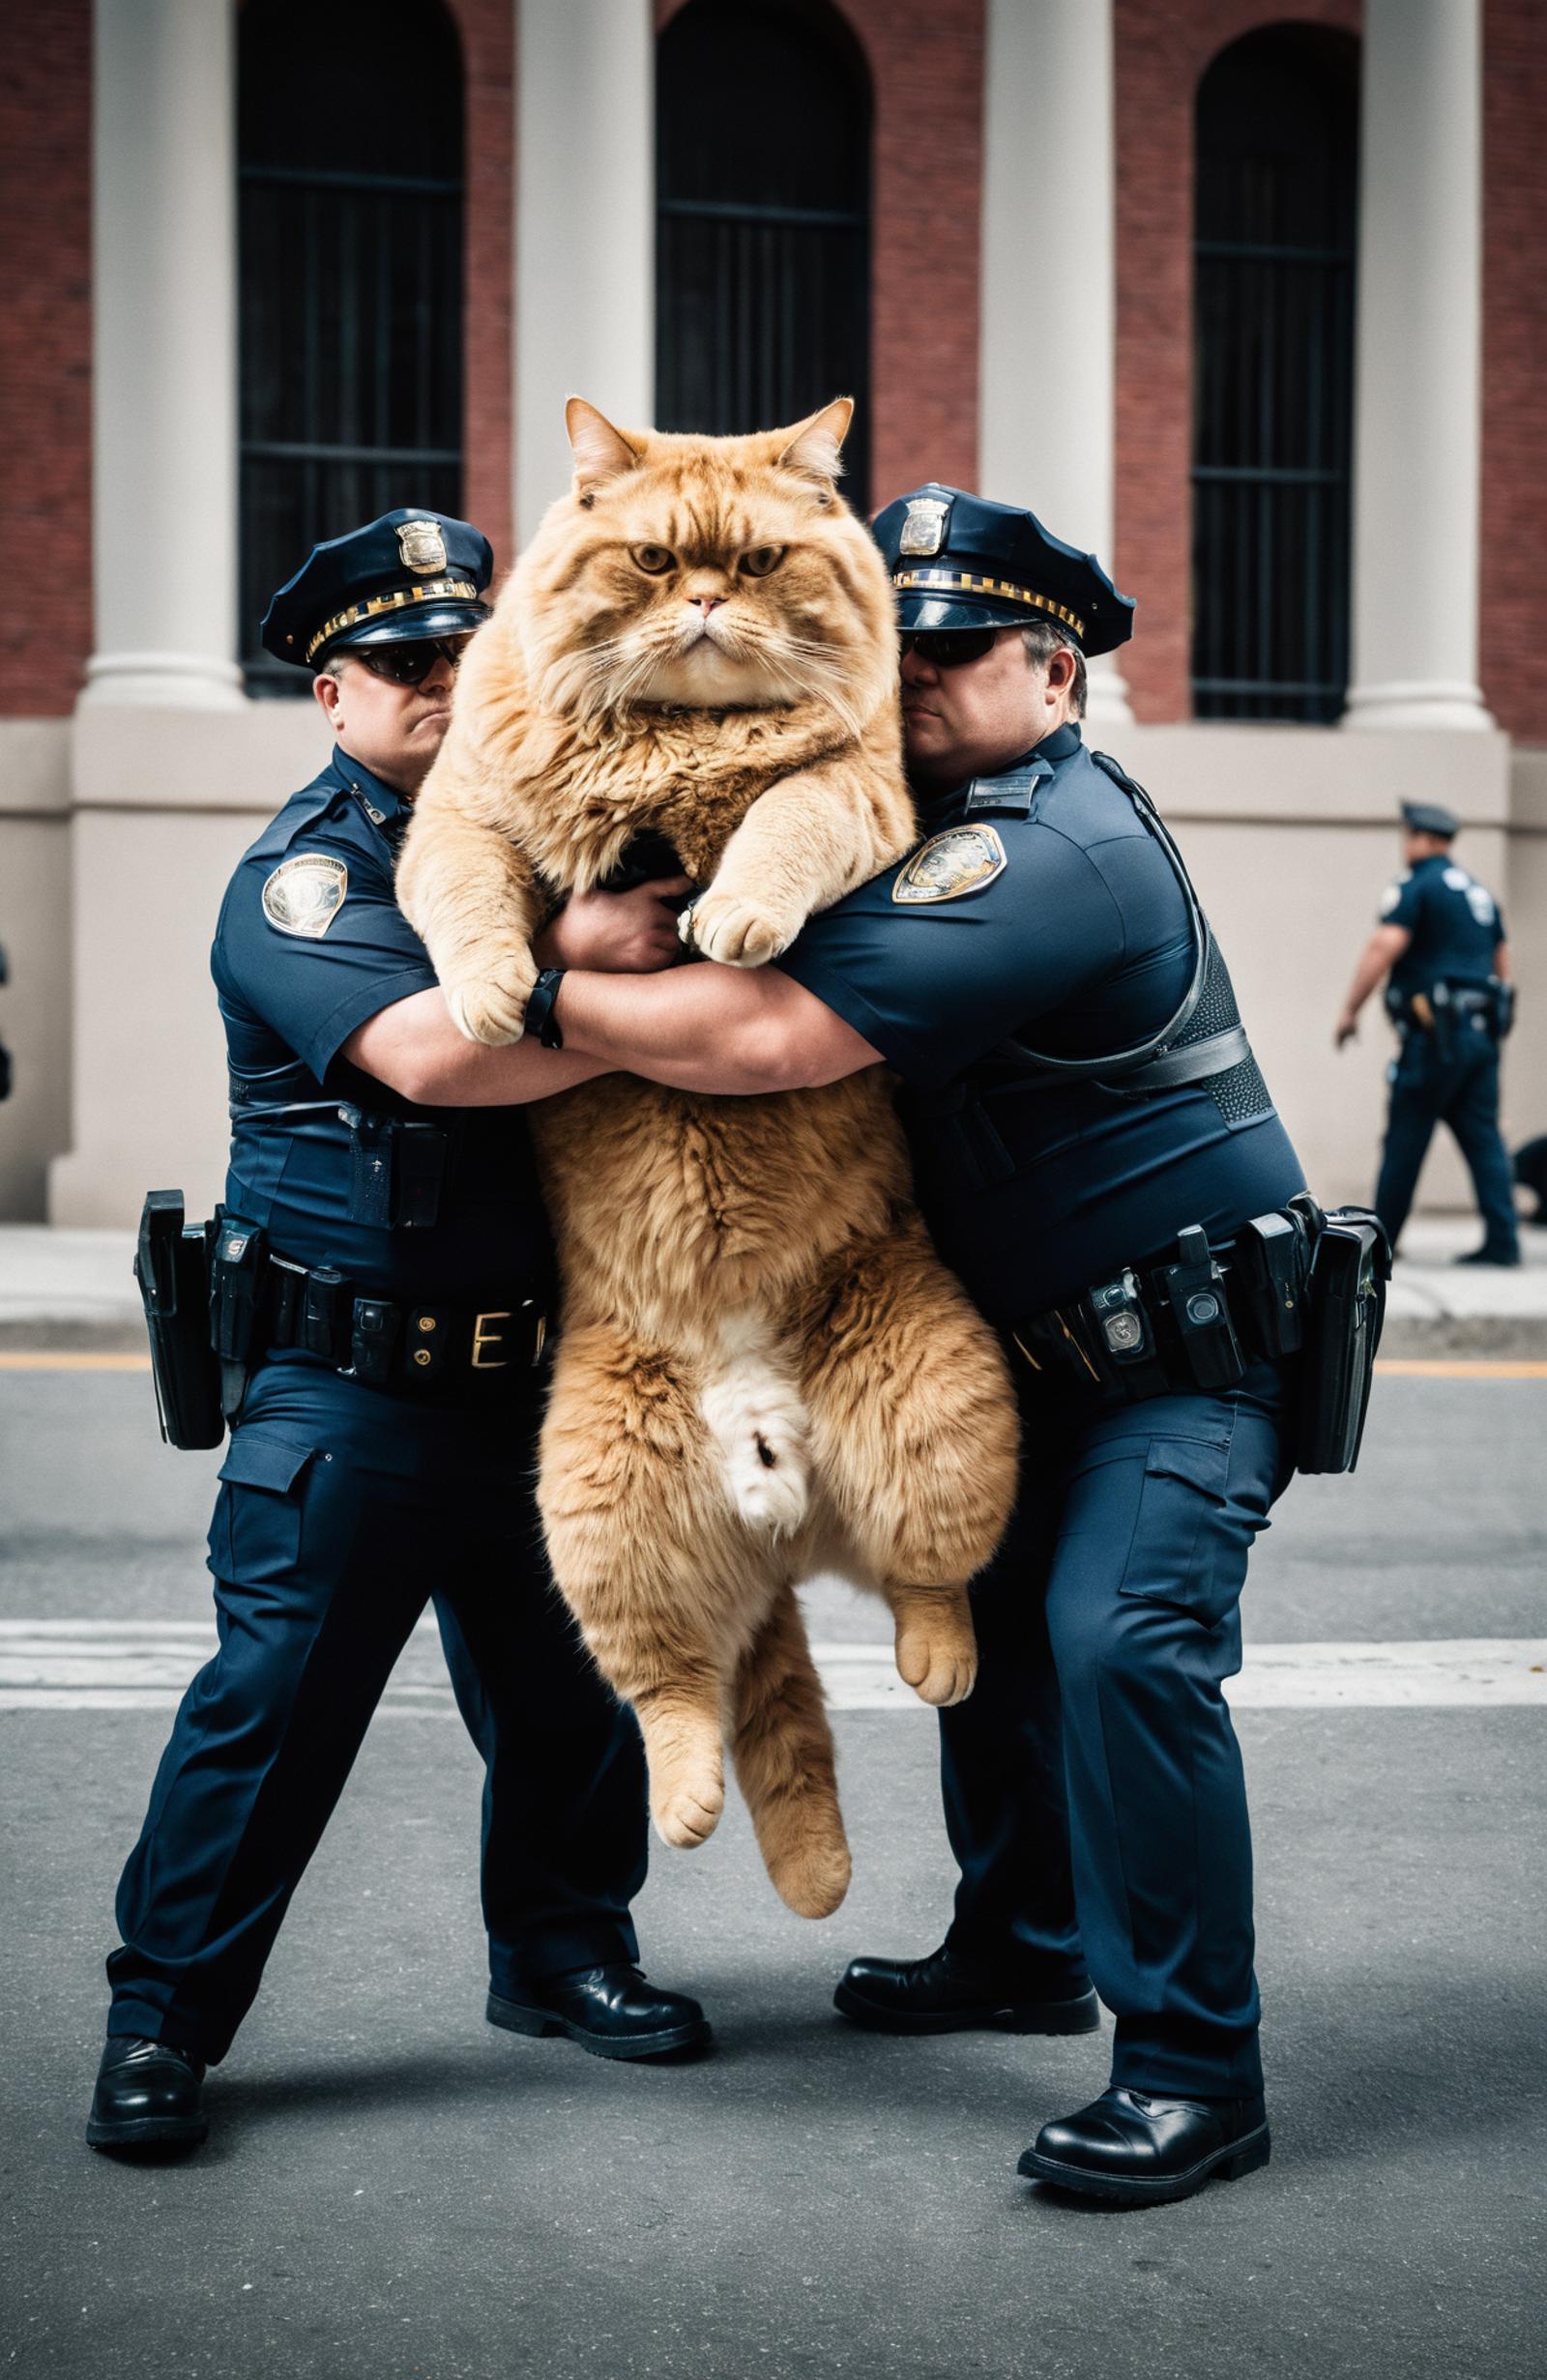 Two police officers holding a large orange cat in the air.